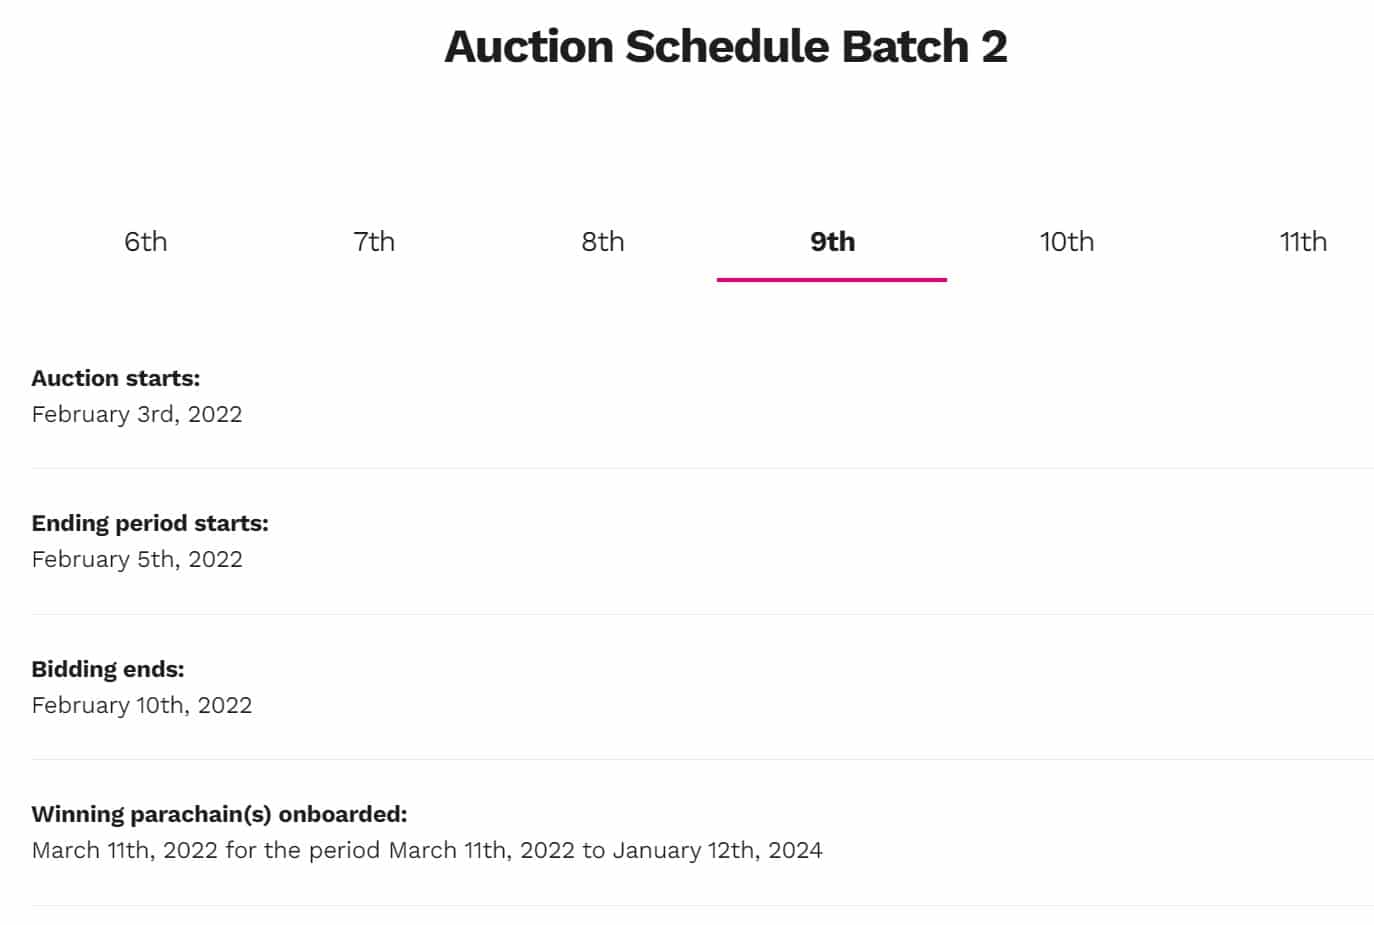 Example of an auction schedule on Polkadot